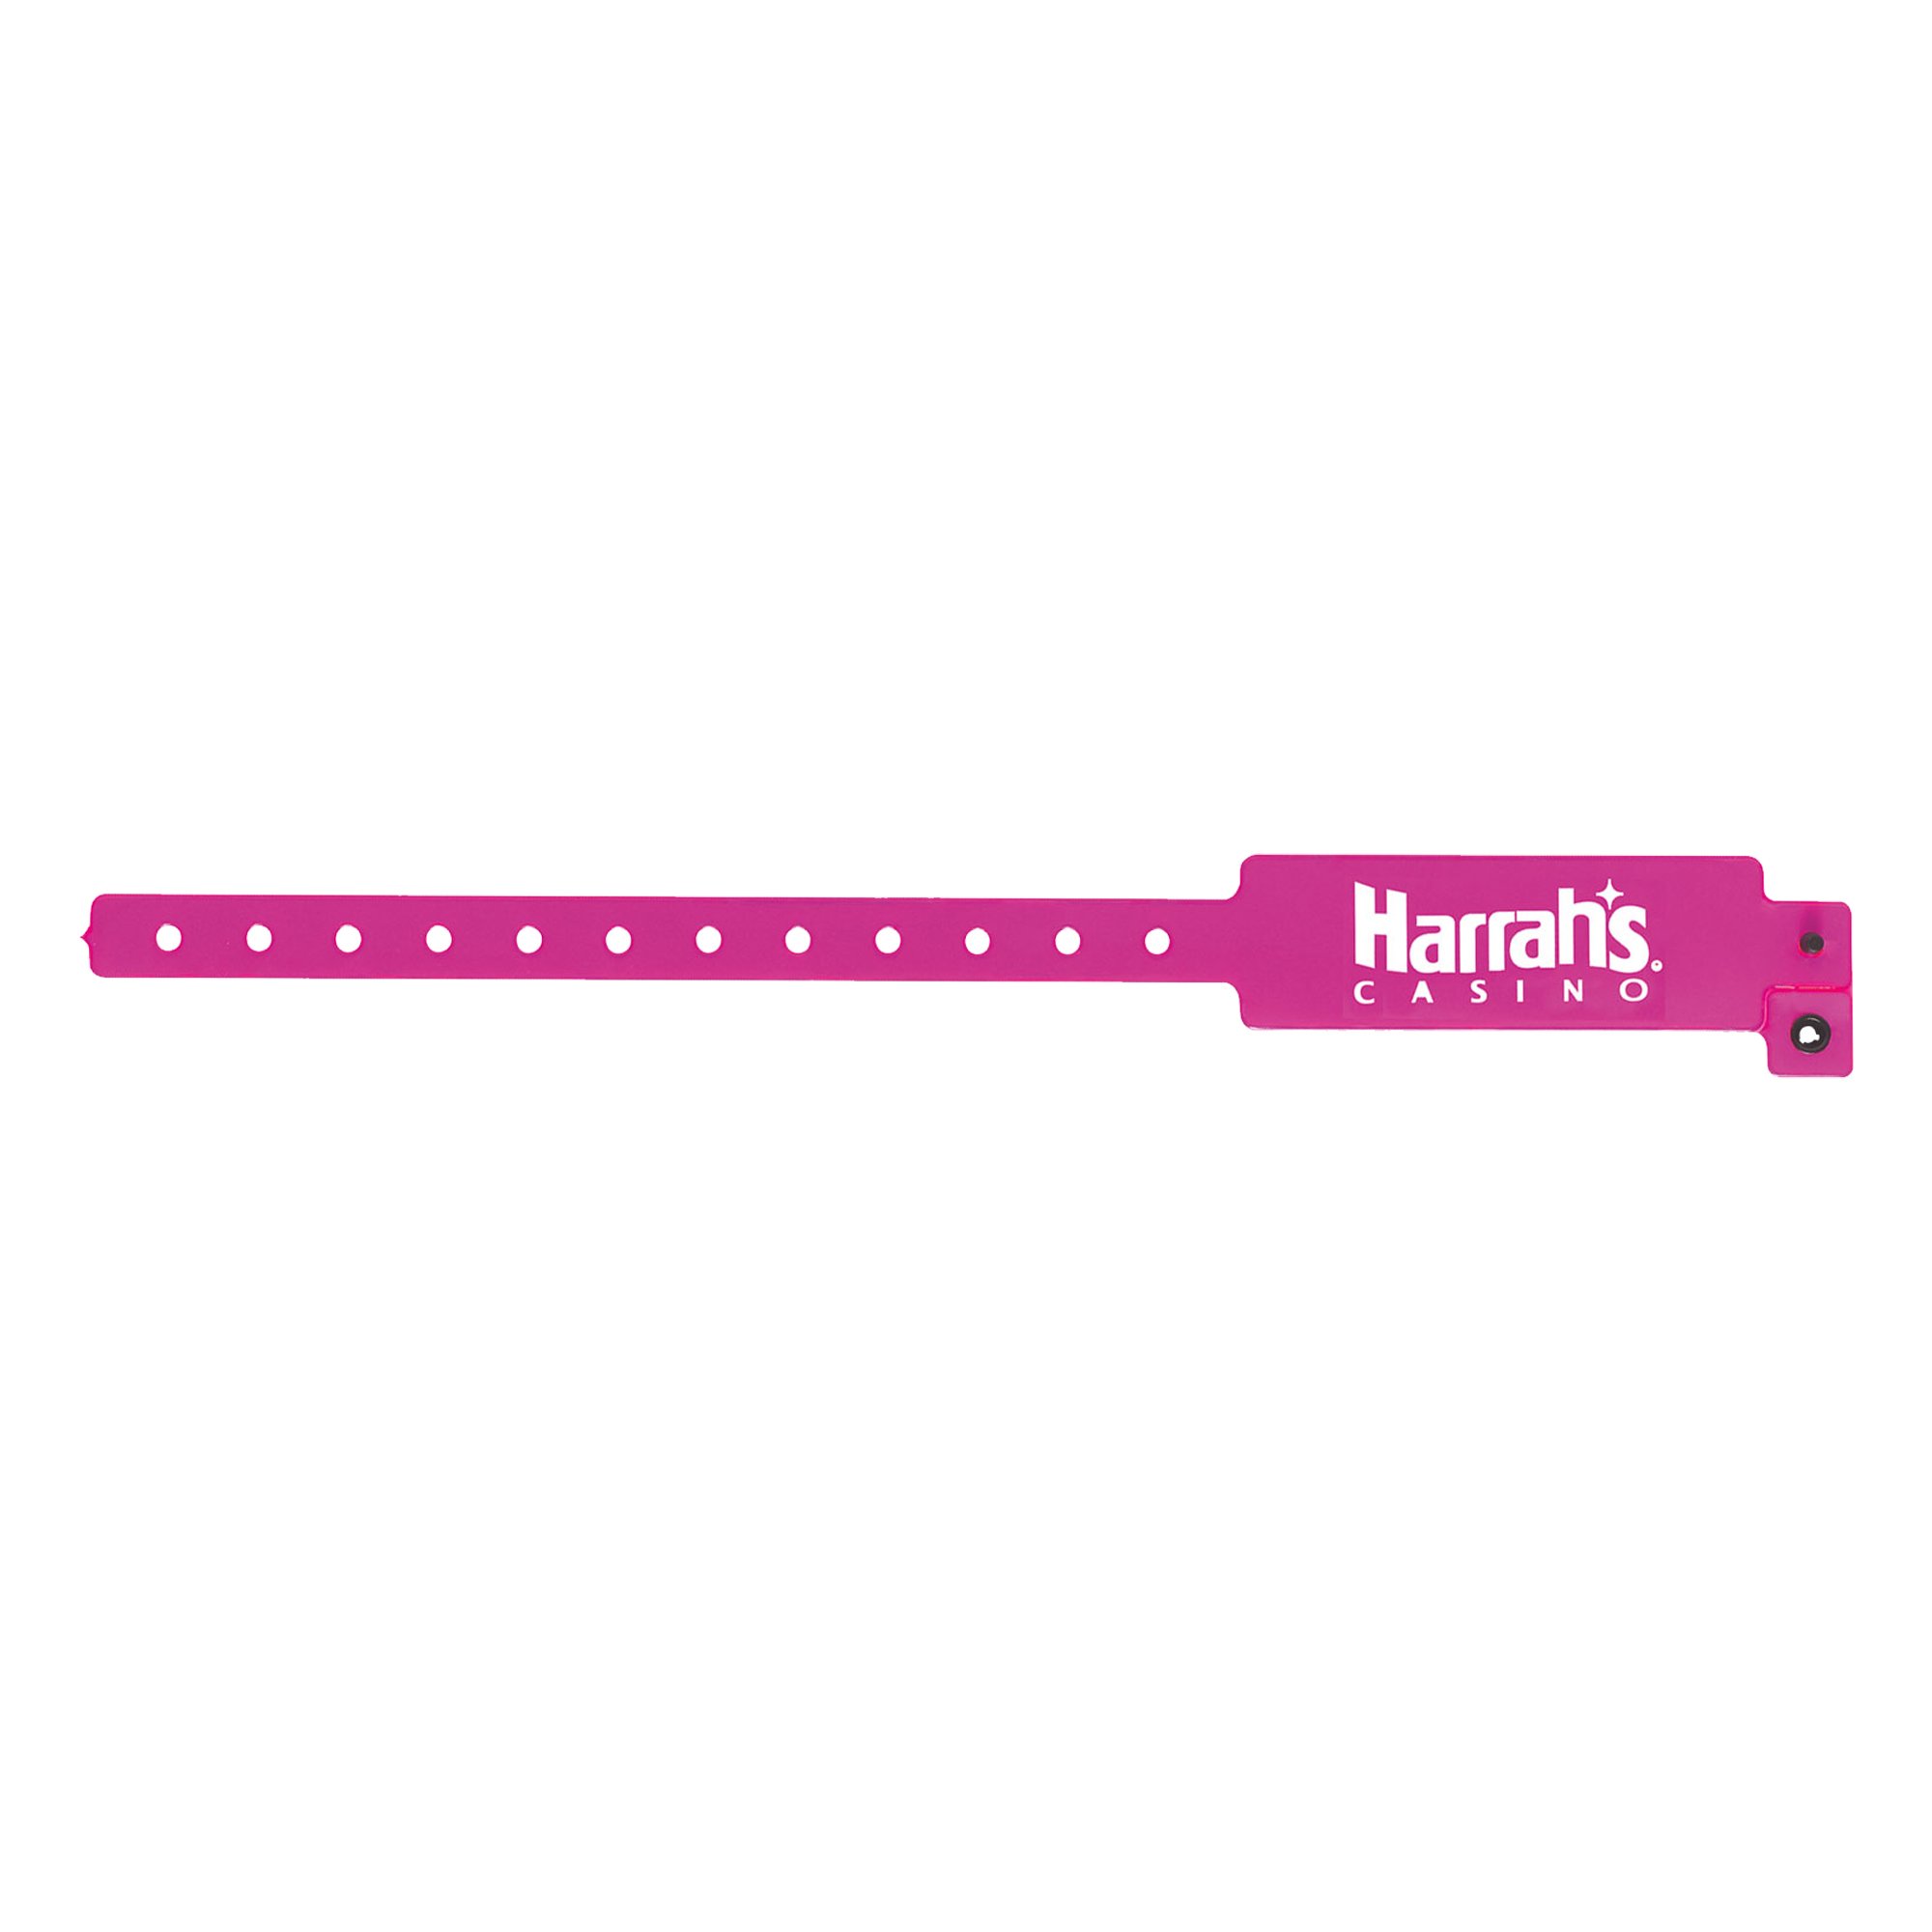 Great brand exposure on this 1" vinyl wristband made with a three layer construction. Wristband components include a one time use secure locking plastic snaps and waterproof fabrication. Recommended wear-time 7 to 14 days. Wristbands fit from child to adult size wrists